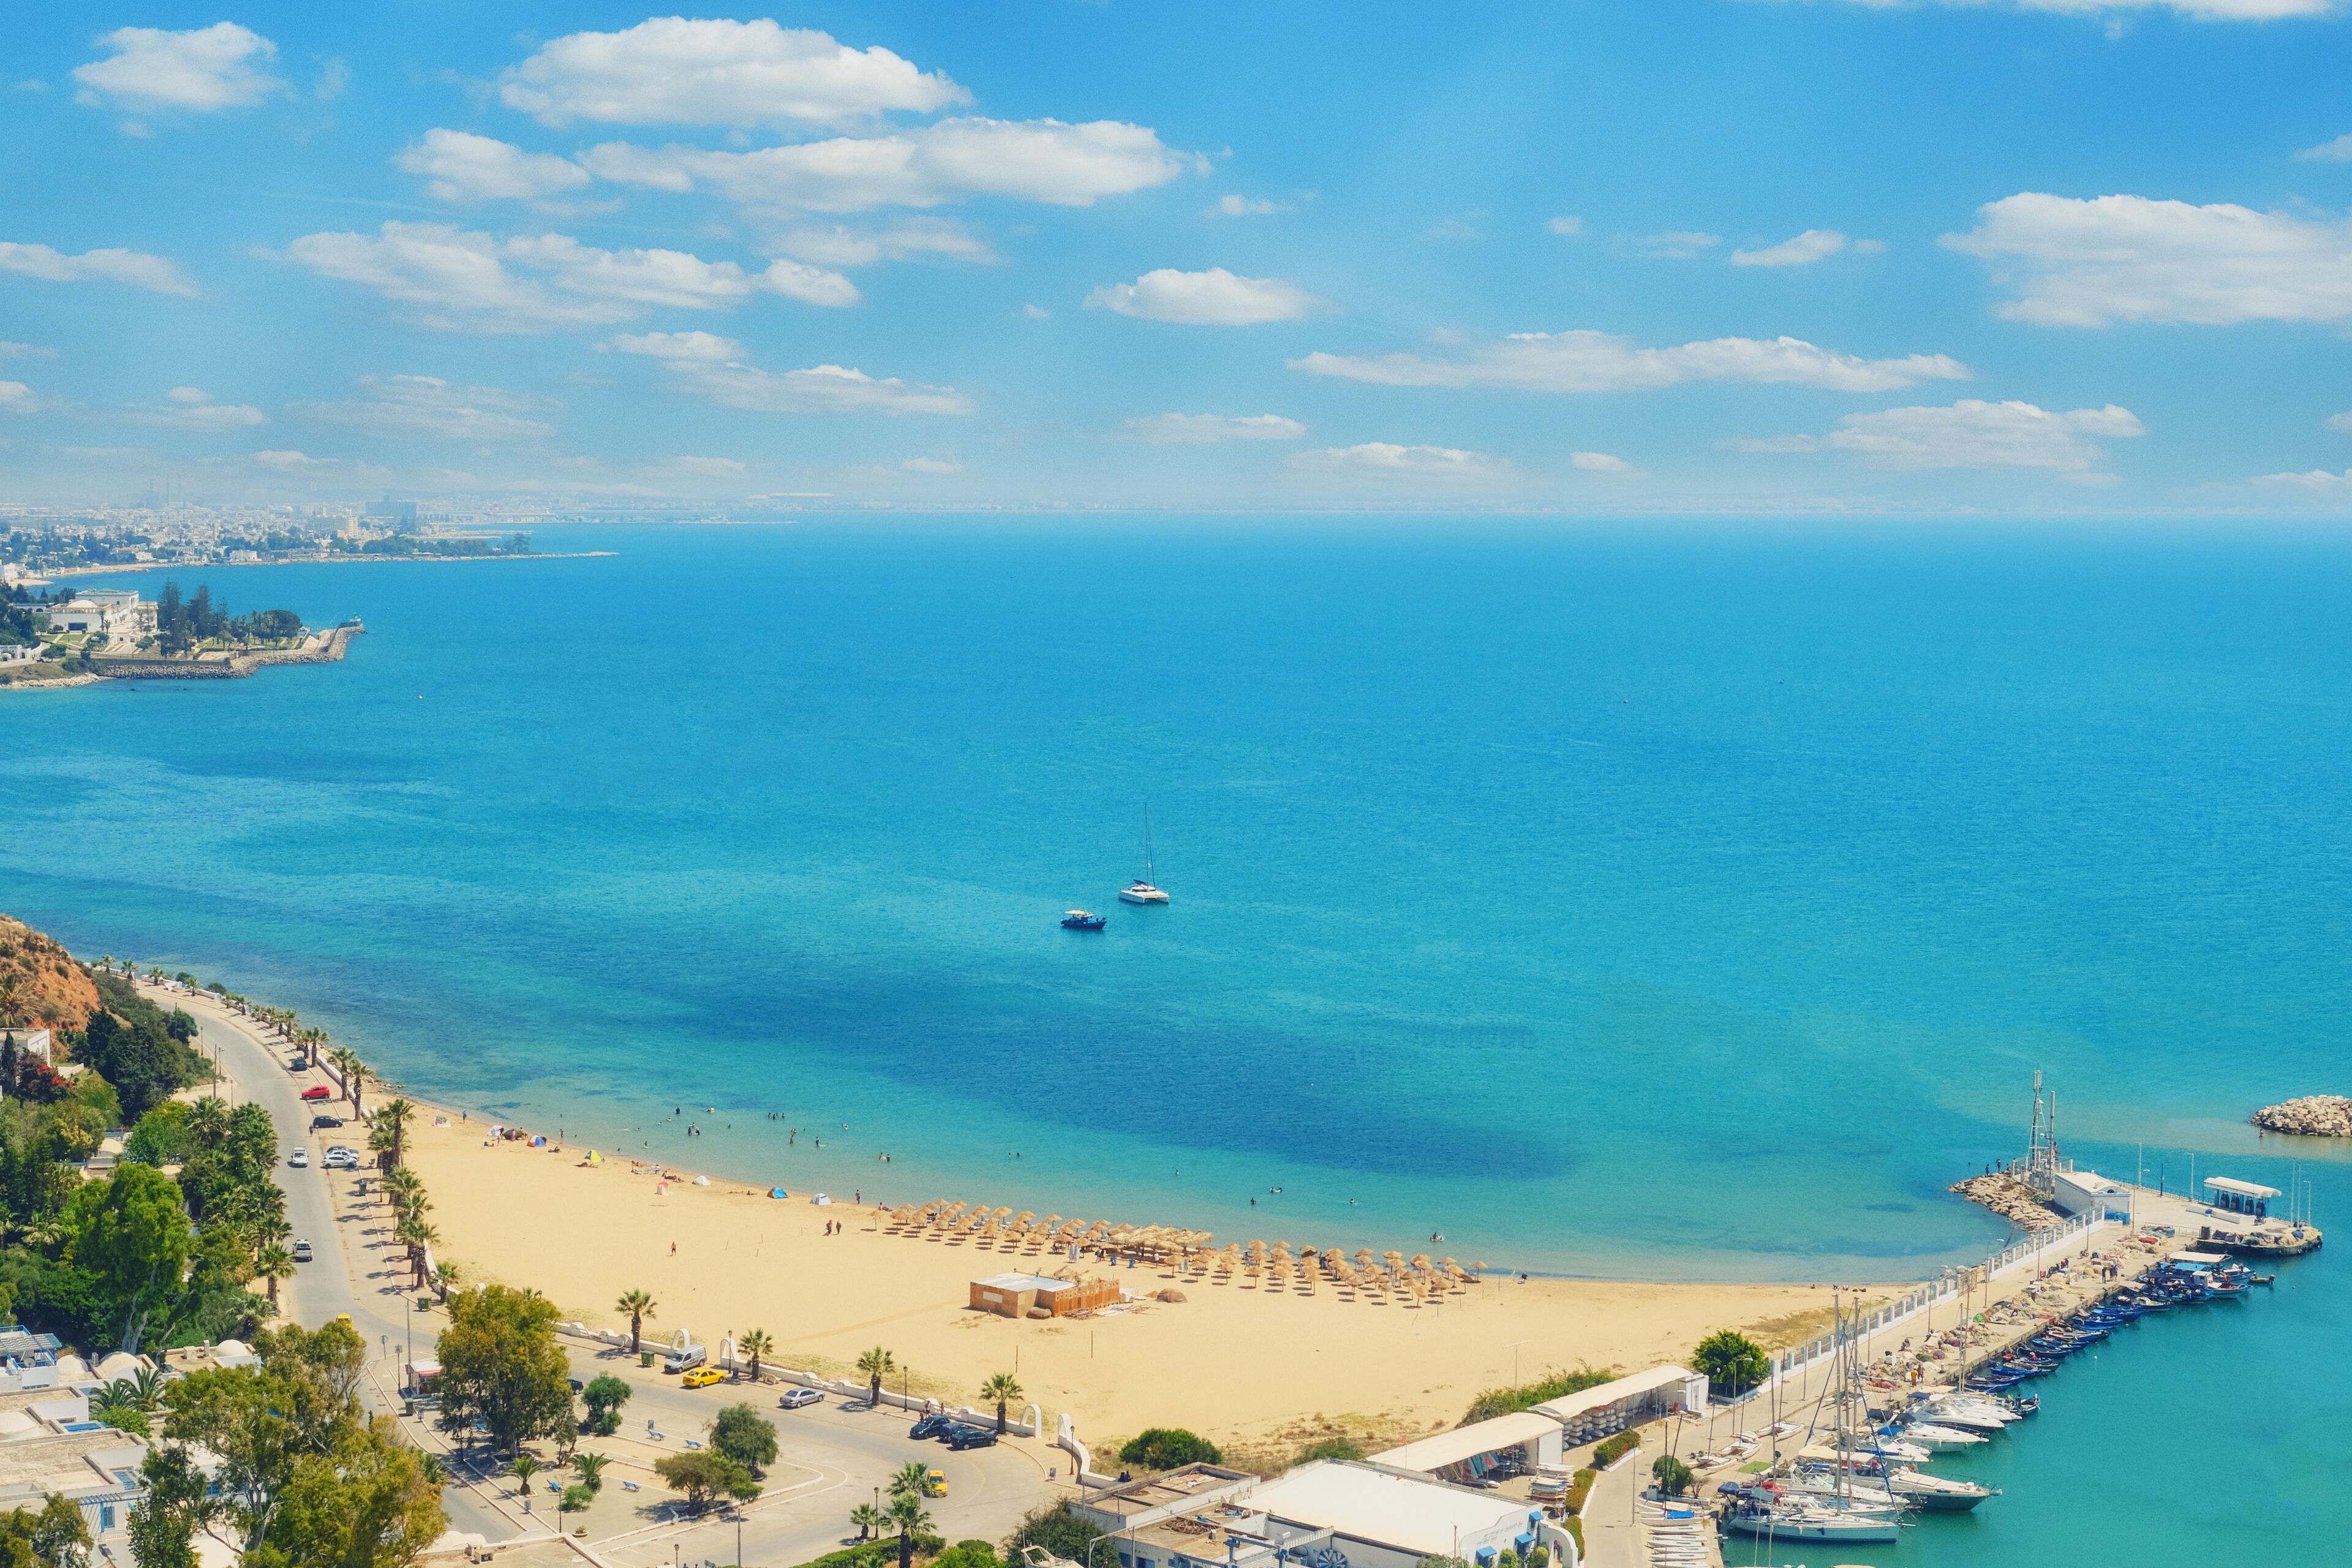 Aerial view of a sun-drenched beach with clear turquoise waters, boats moored in a small harbor, and a sweeping view of the coastline and cityscape in the distance.